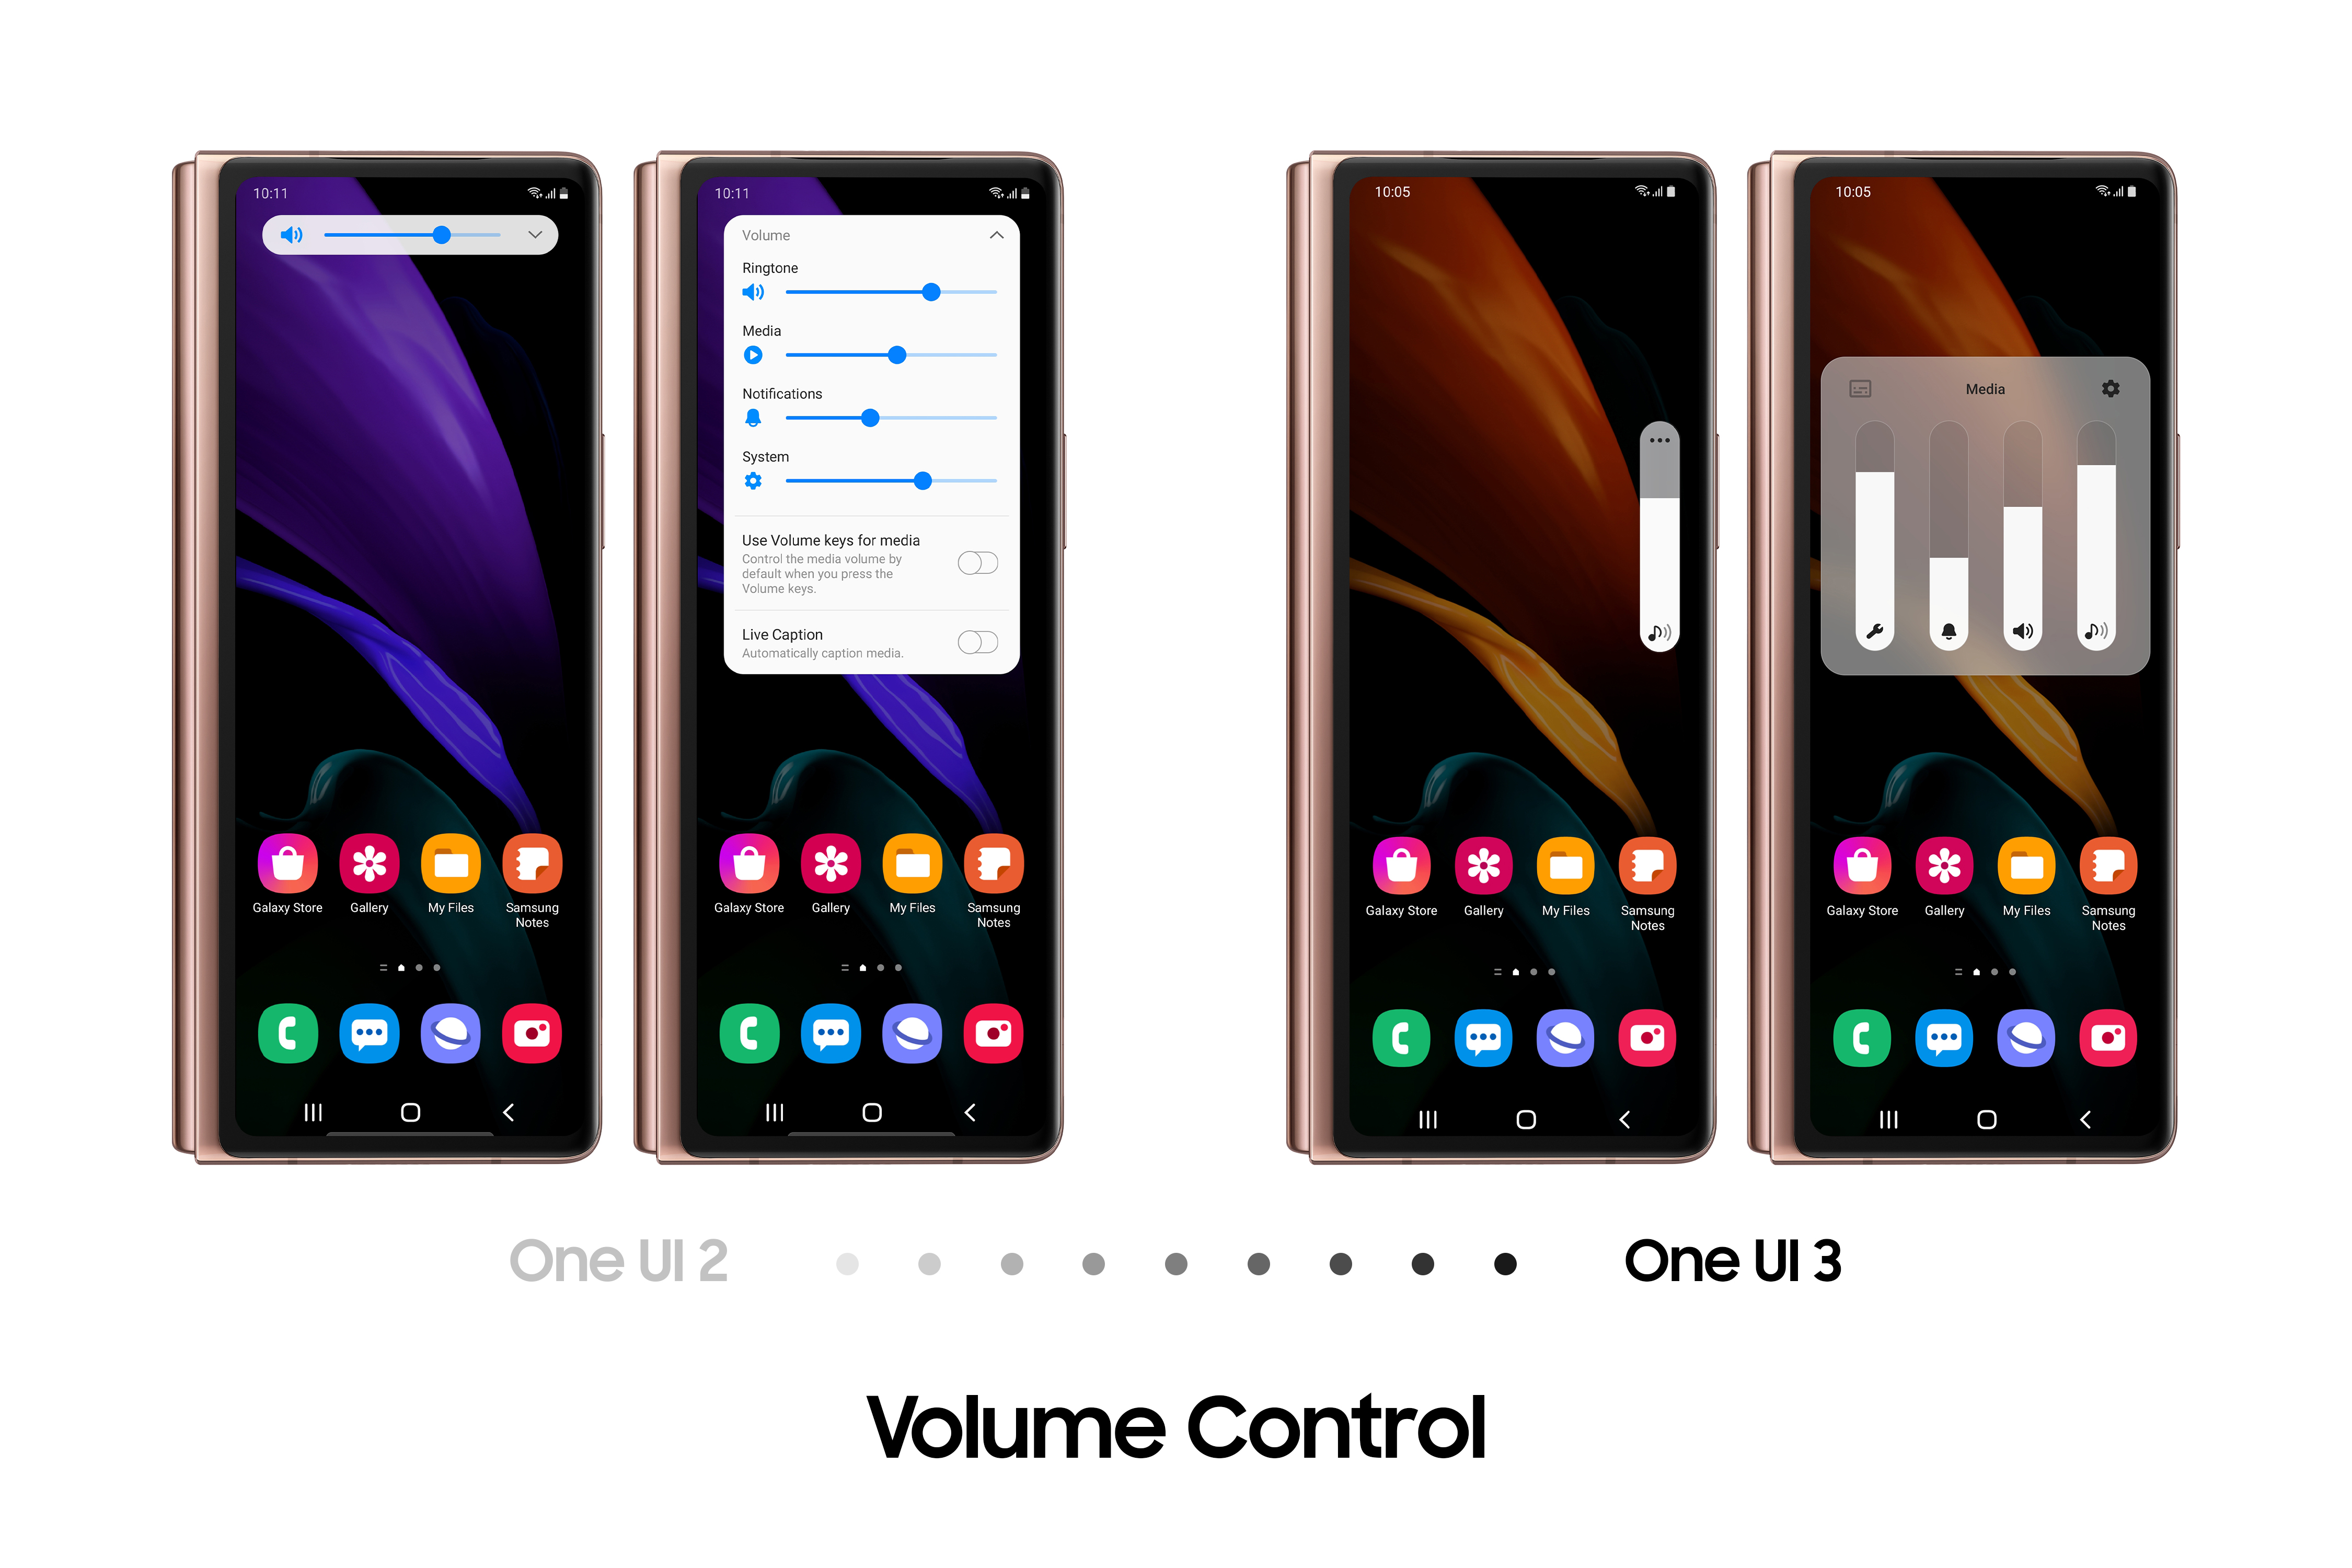 One UI 3 Brings Seamless Continuity and Intuitive Interactions to the Galaxy Z Fold2: Volume Control